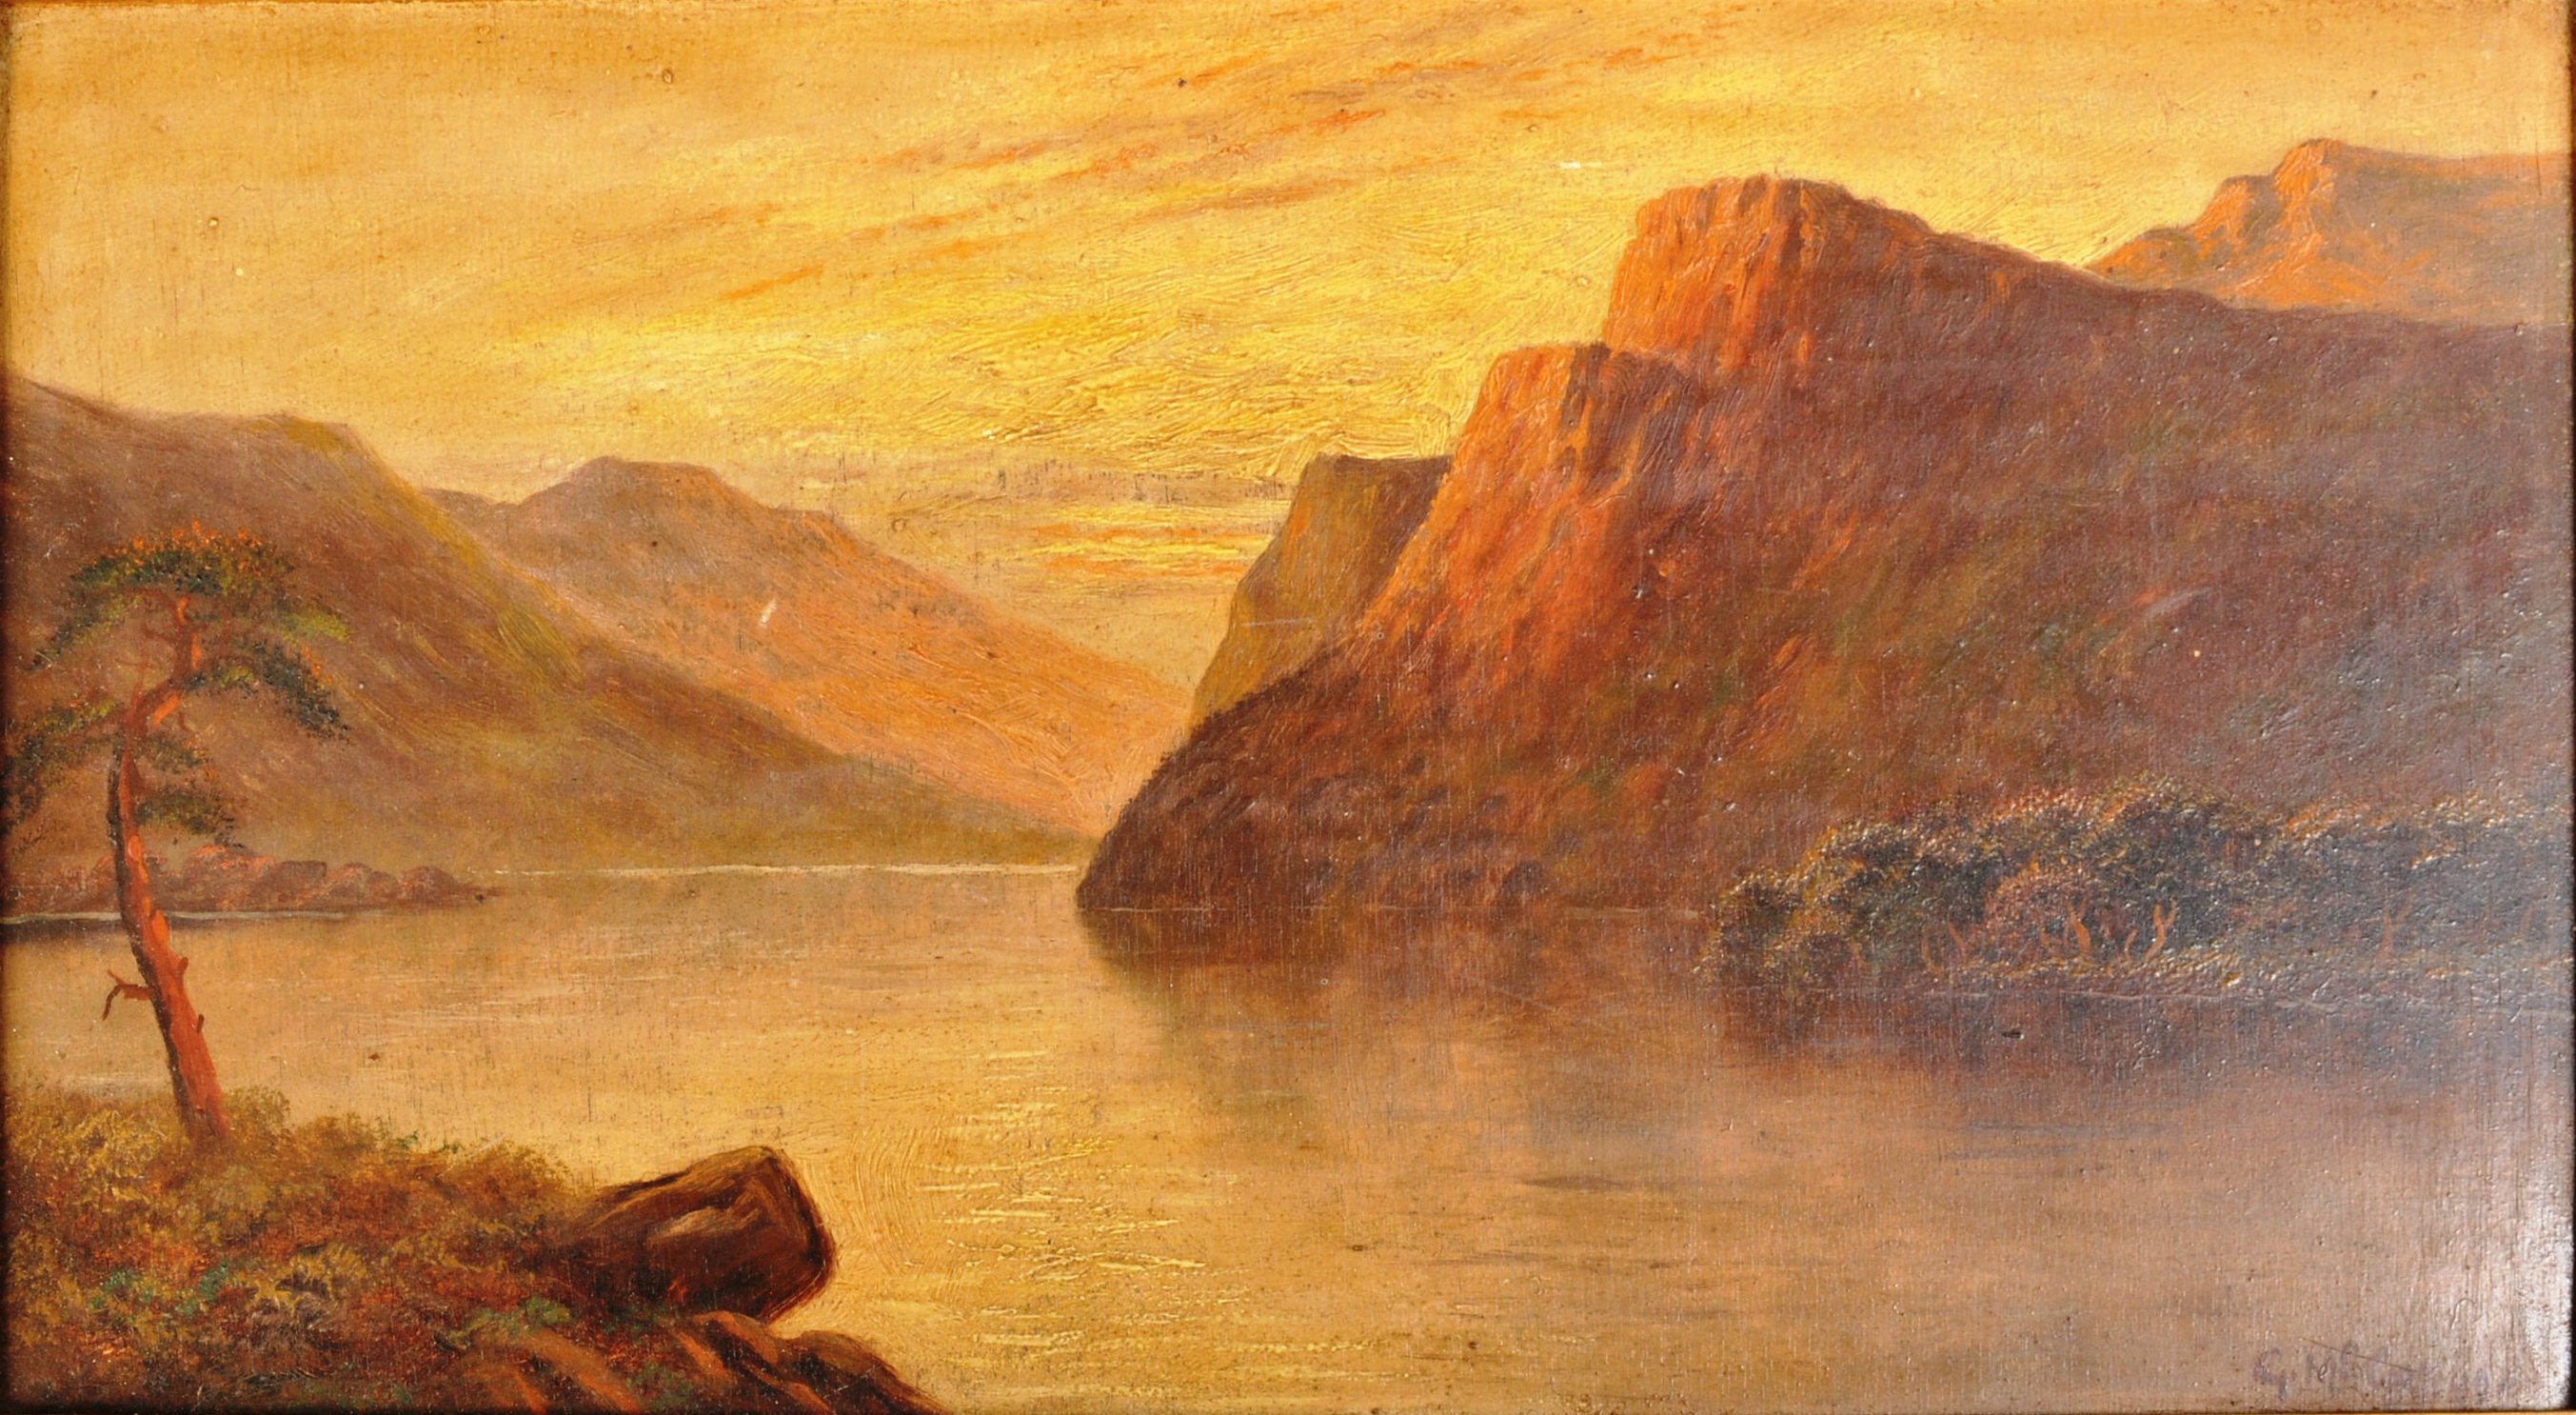 EARLY 20TH CENTURY OIL ON BOARD LANDSCAPE PAINTING - Image 2 of 7